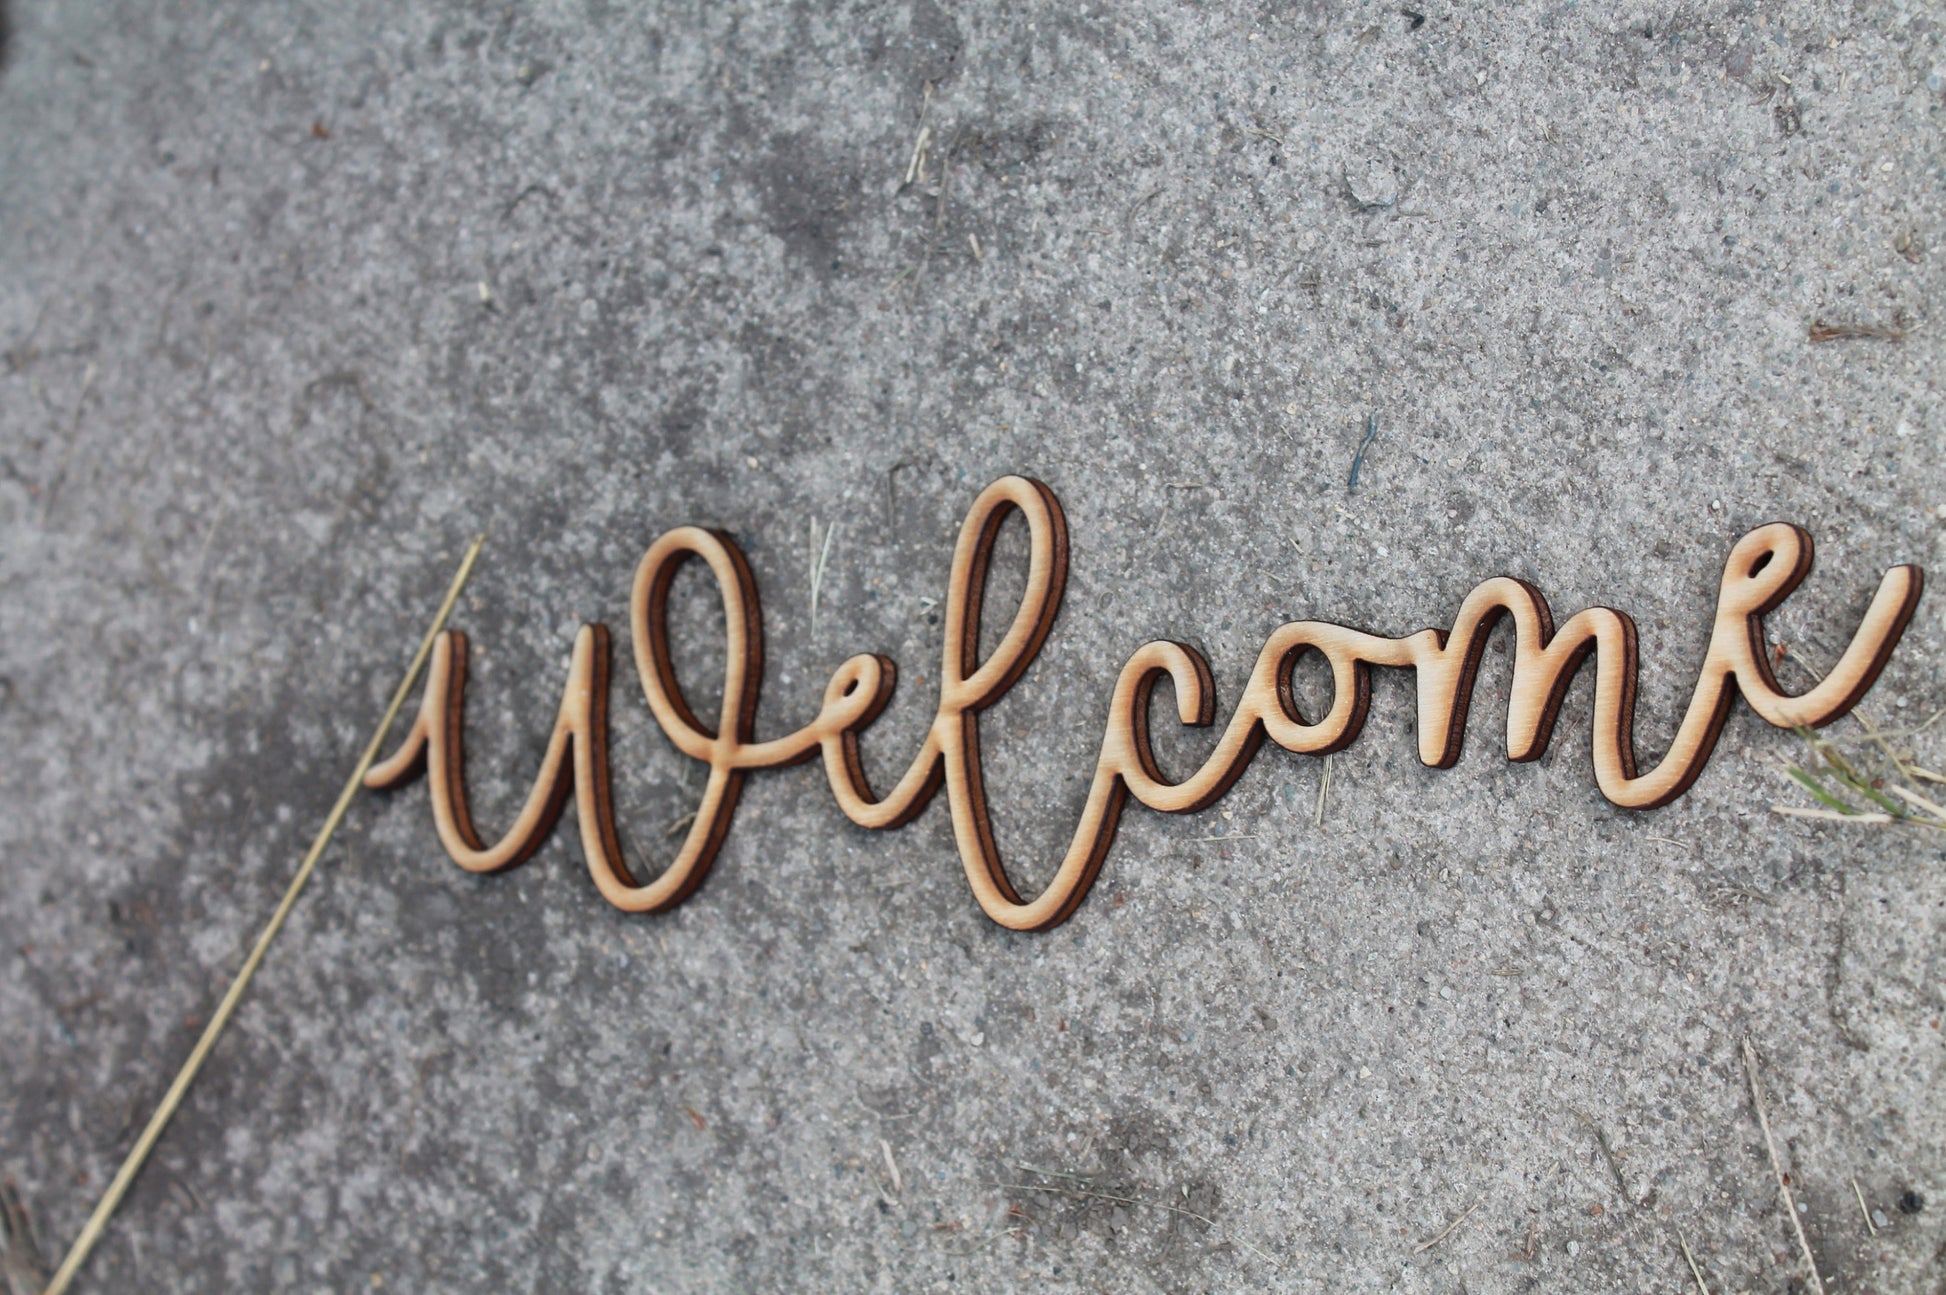 12 inch Laser Cut Out, Welcome Sign, Welcome, Welcome Cutout,  Welcome DIY, Wood Word, Craft, Laser Cut Wood Word, Wooden, Decor, Birch